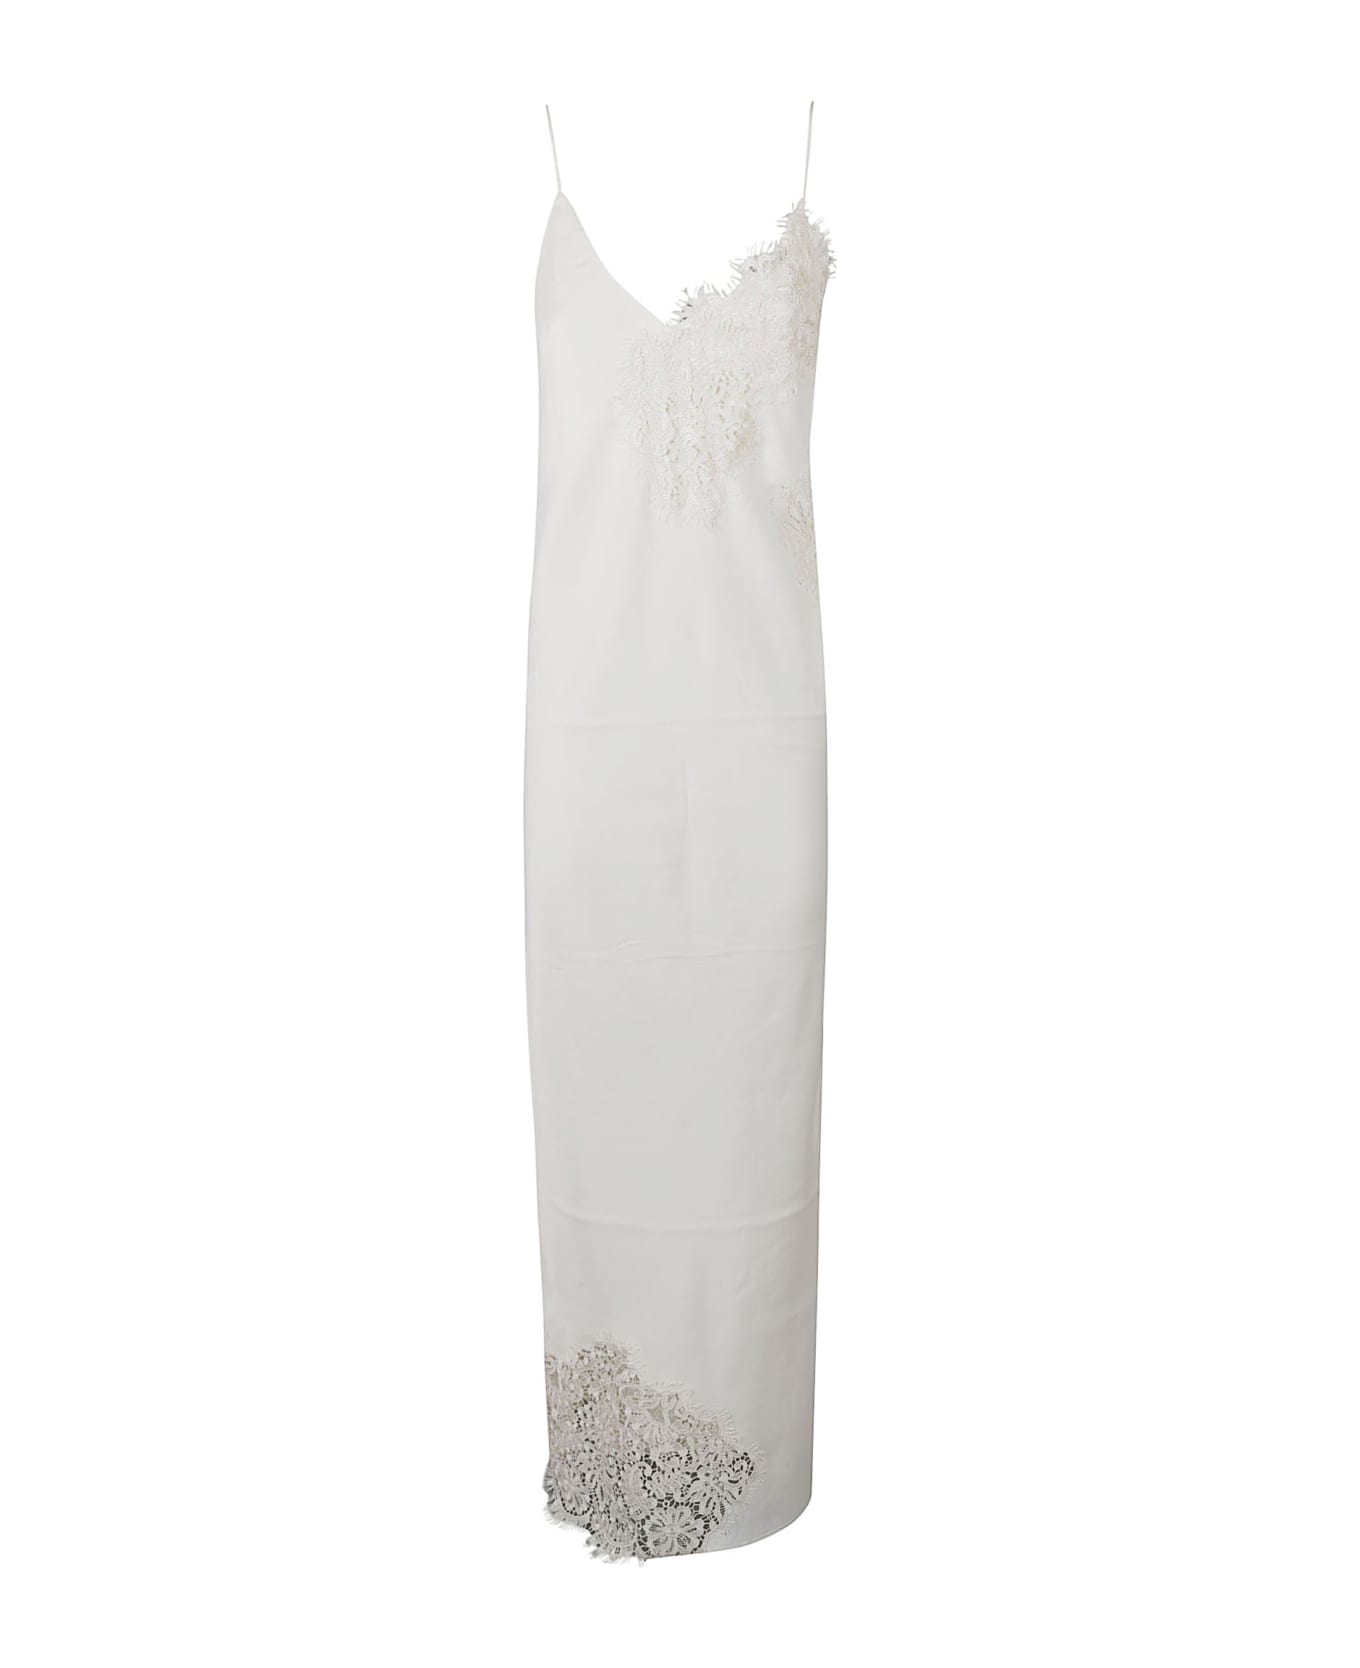 Róhe Lace Paneled Embroidered Long Dress - Cream